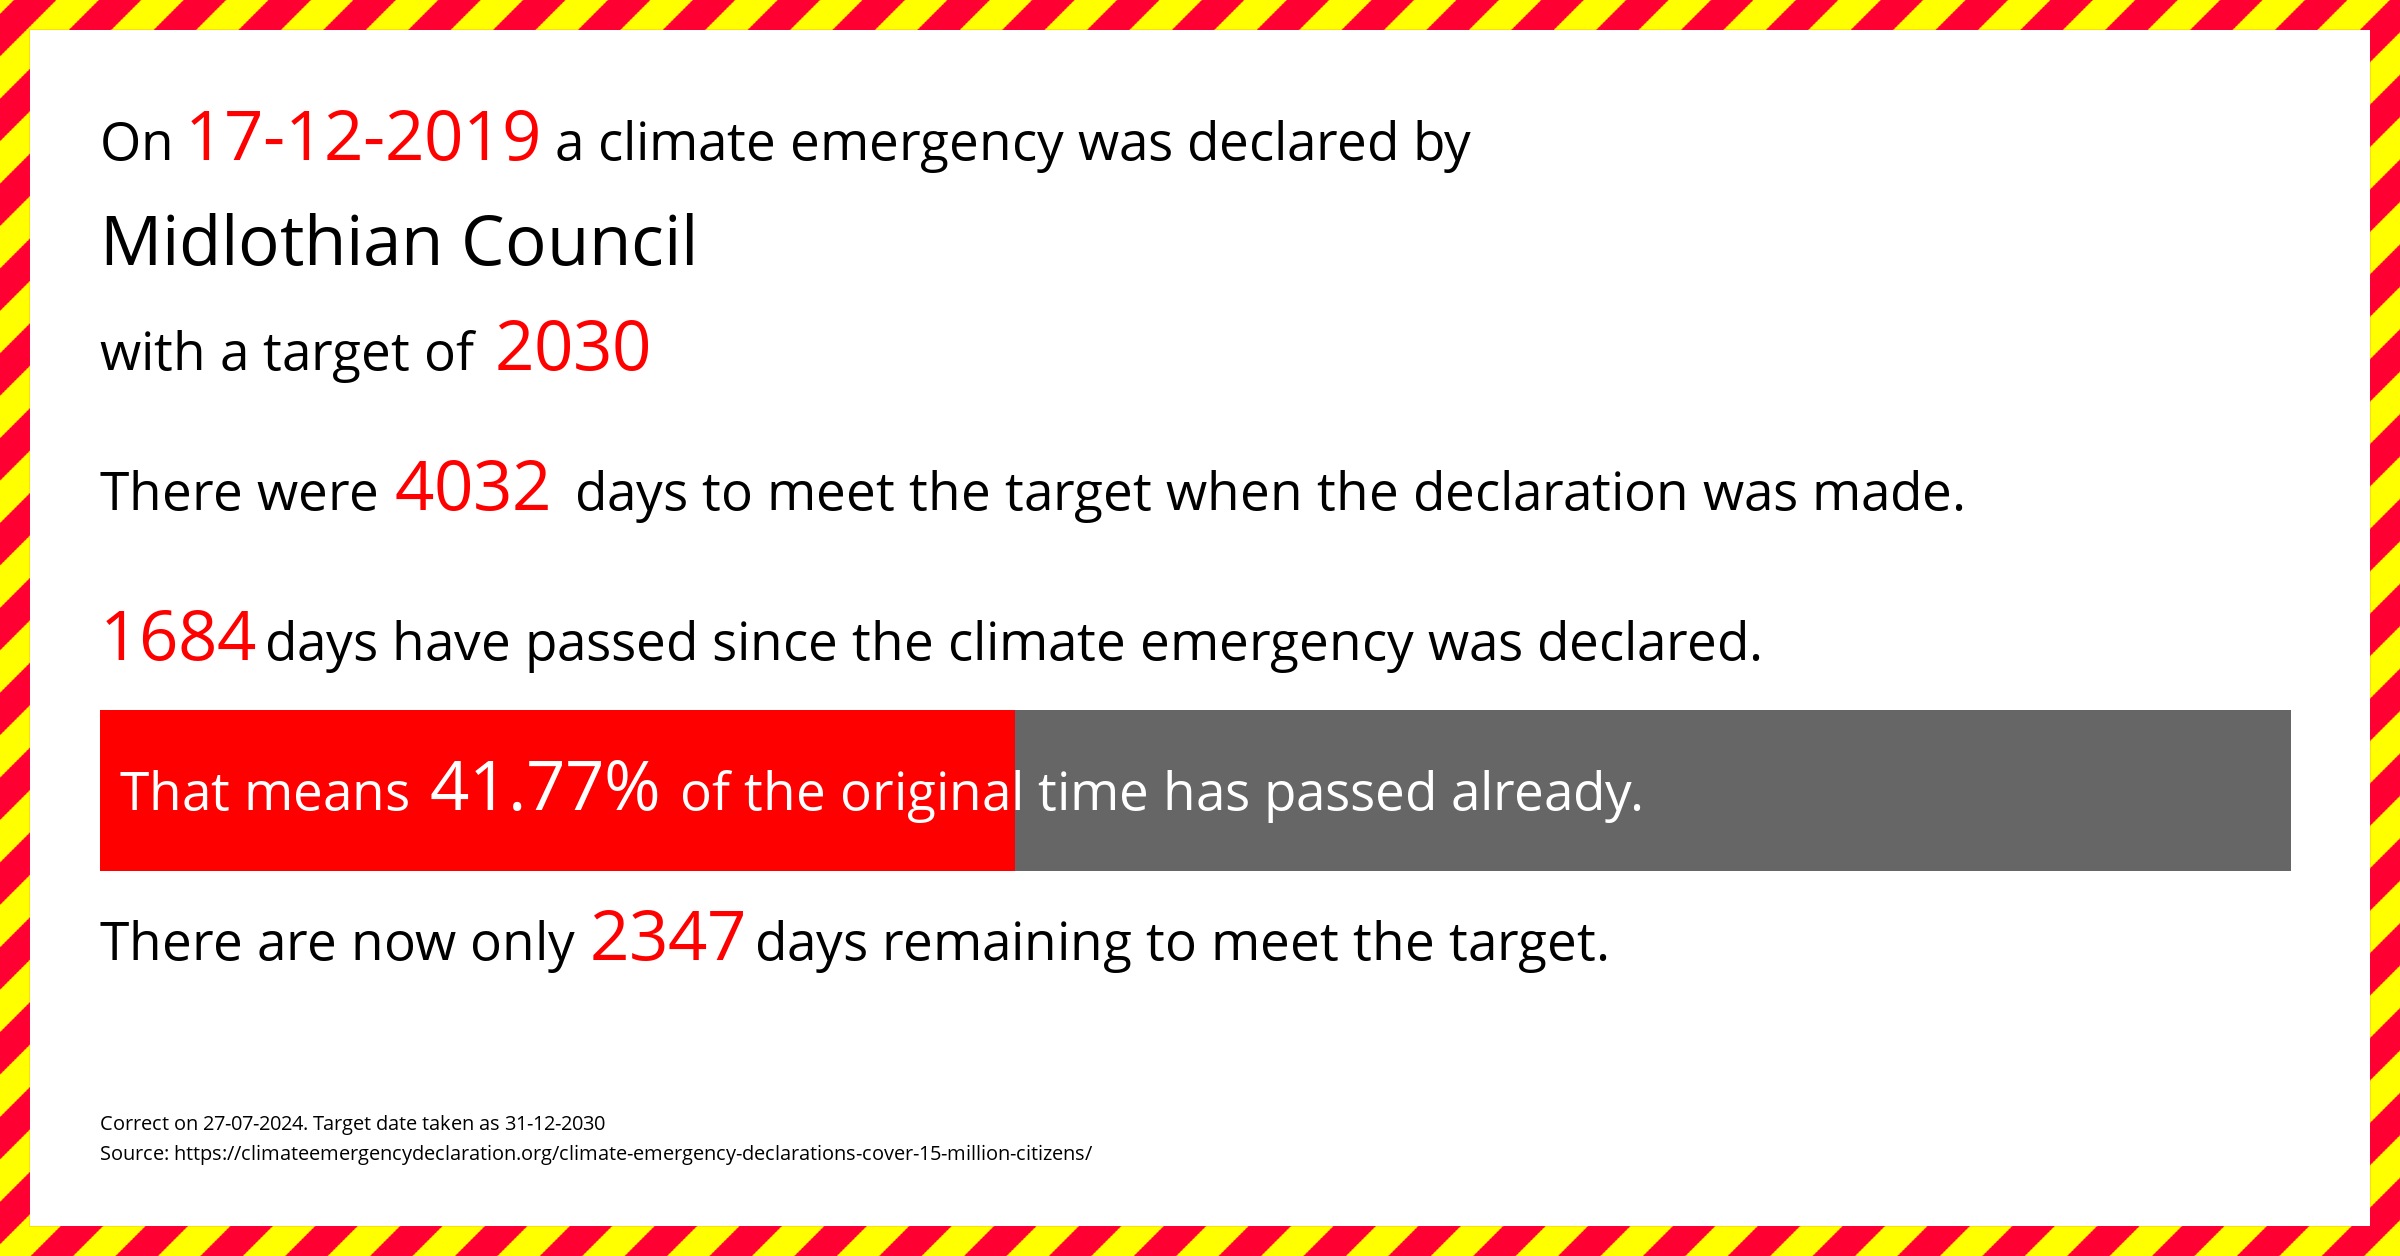 Midlothian Council declared a Climate emergency on Tuesday 17th December 2019, with a target of 2030.